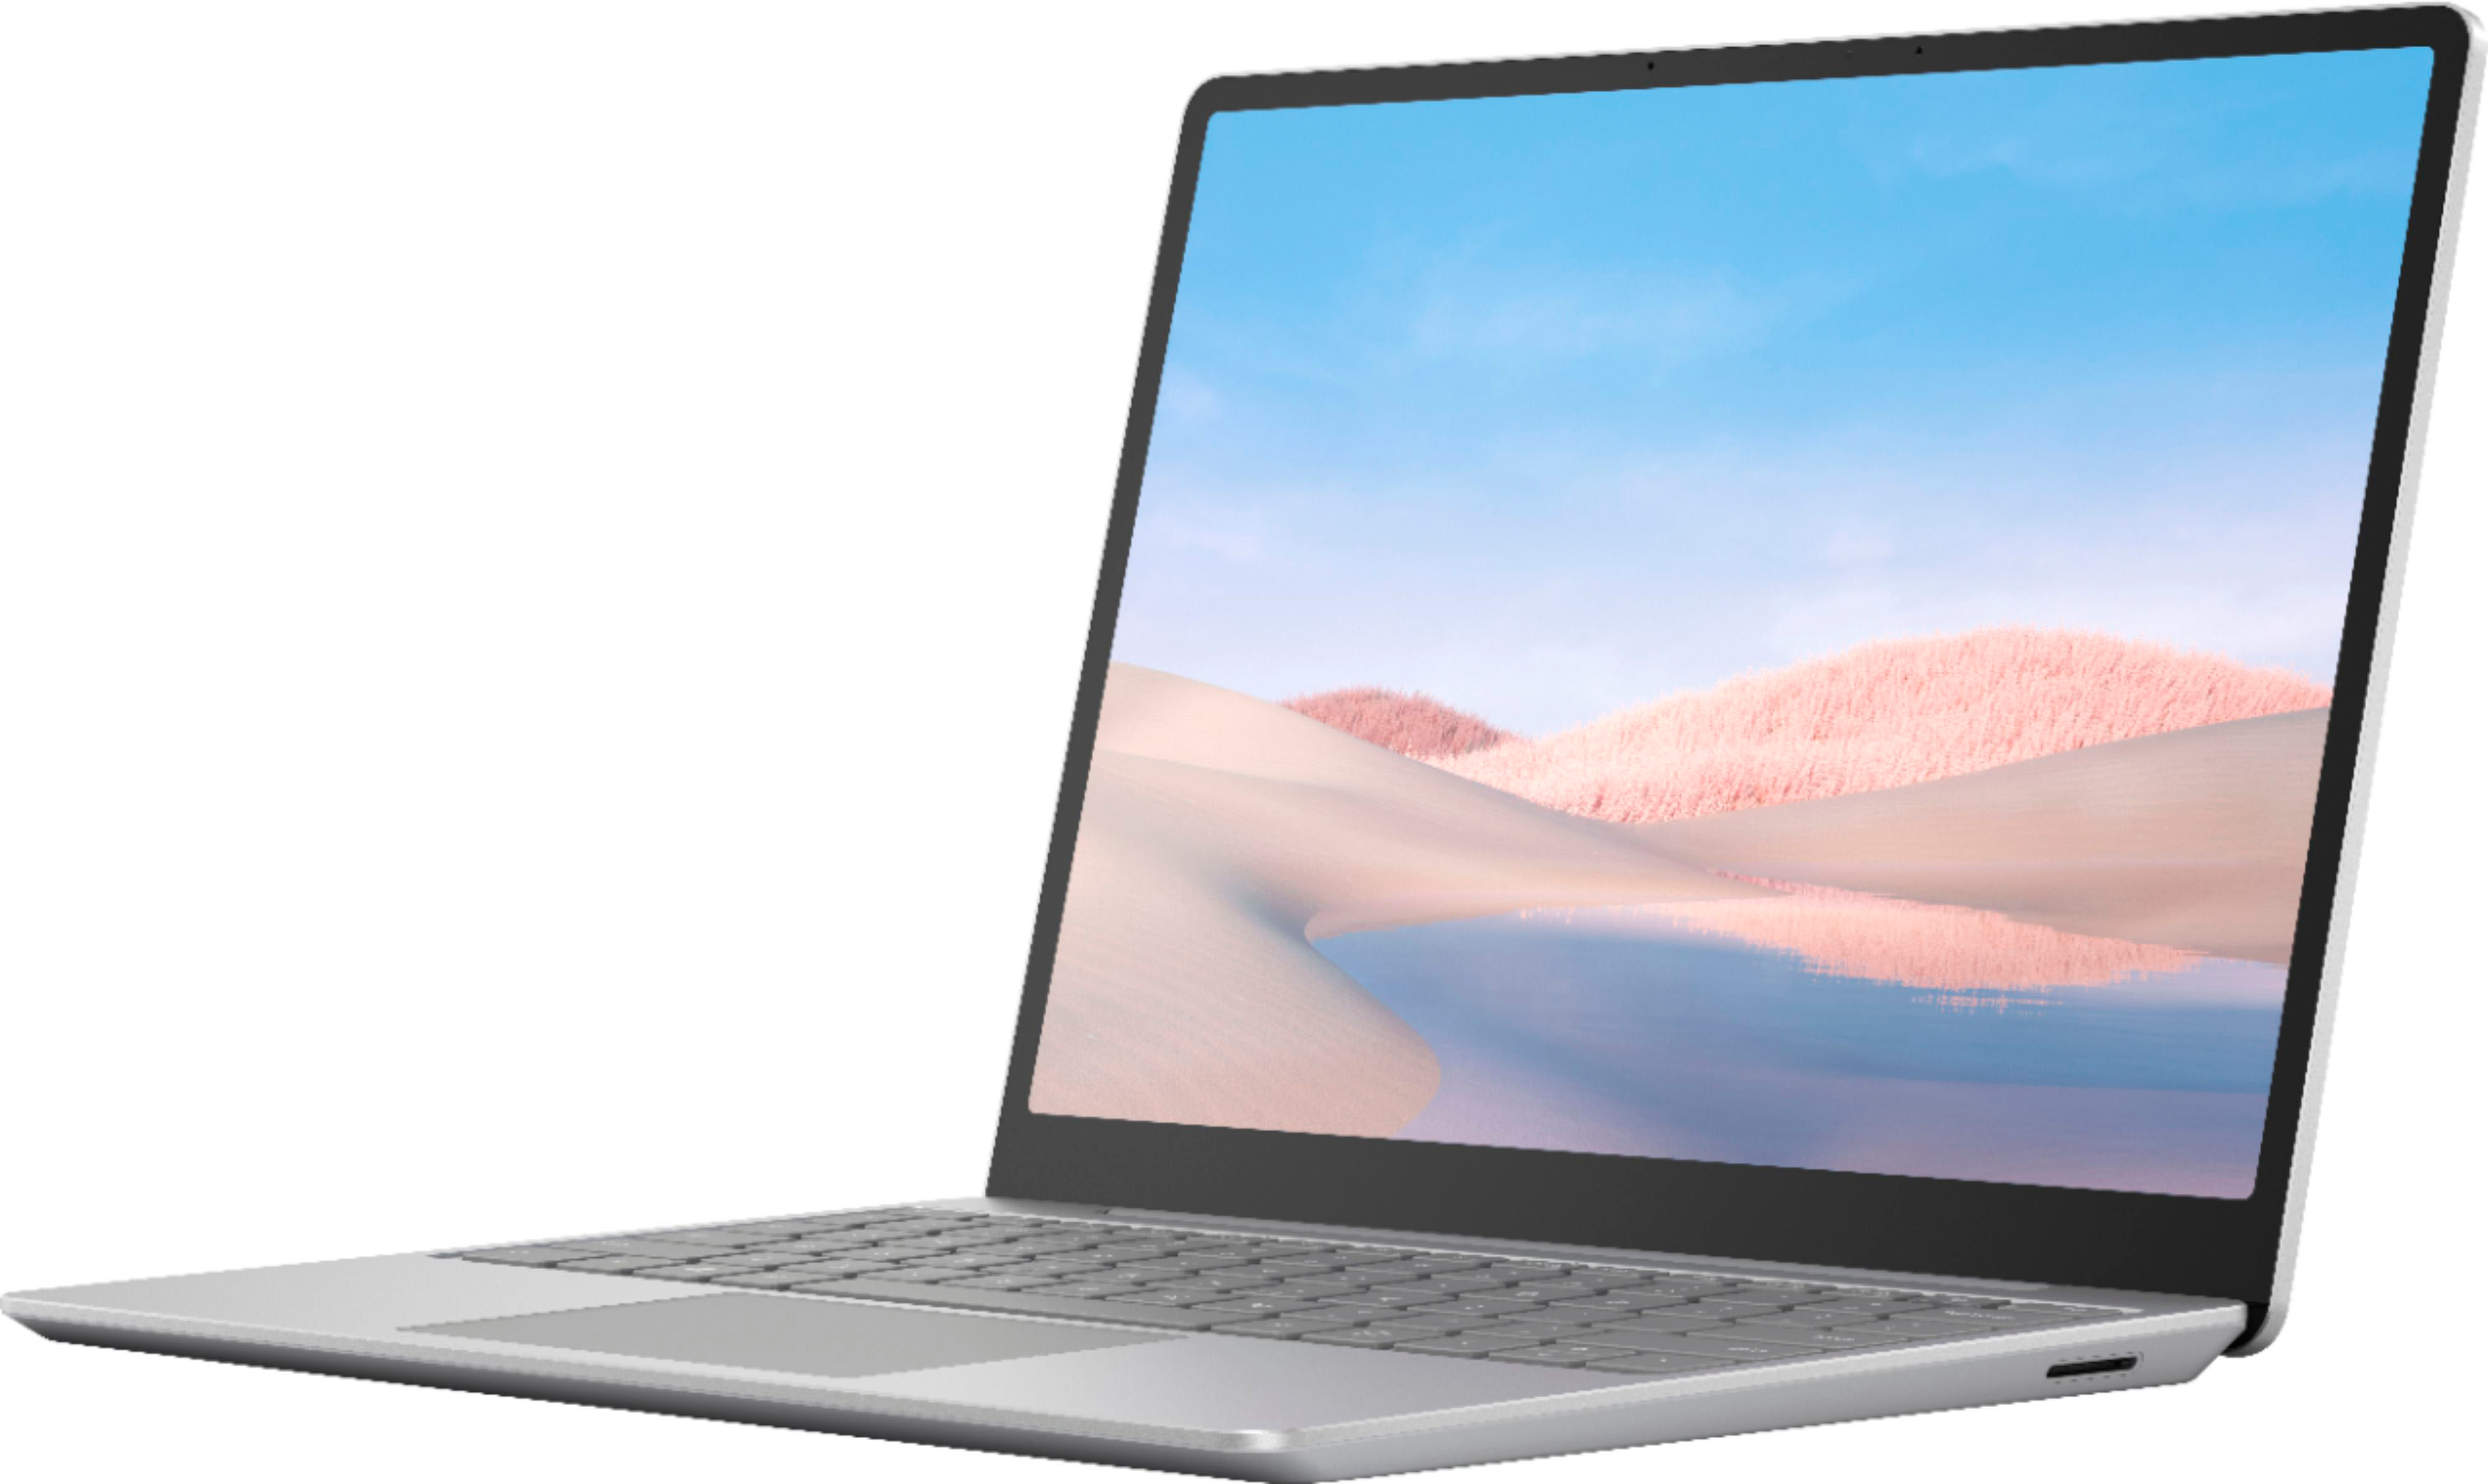 Microsoft – Geek Squad Certified Refurbished Surface Laptop Go 12.4″ Touch-Screen Laptop – Intel Core i5 – 8GB Memory – 128GB SSD – Platinum